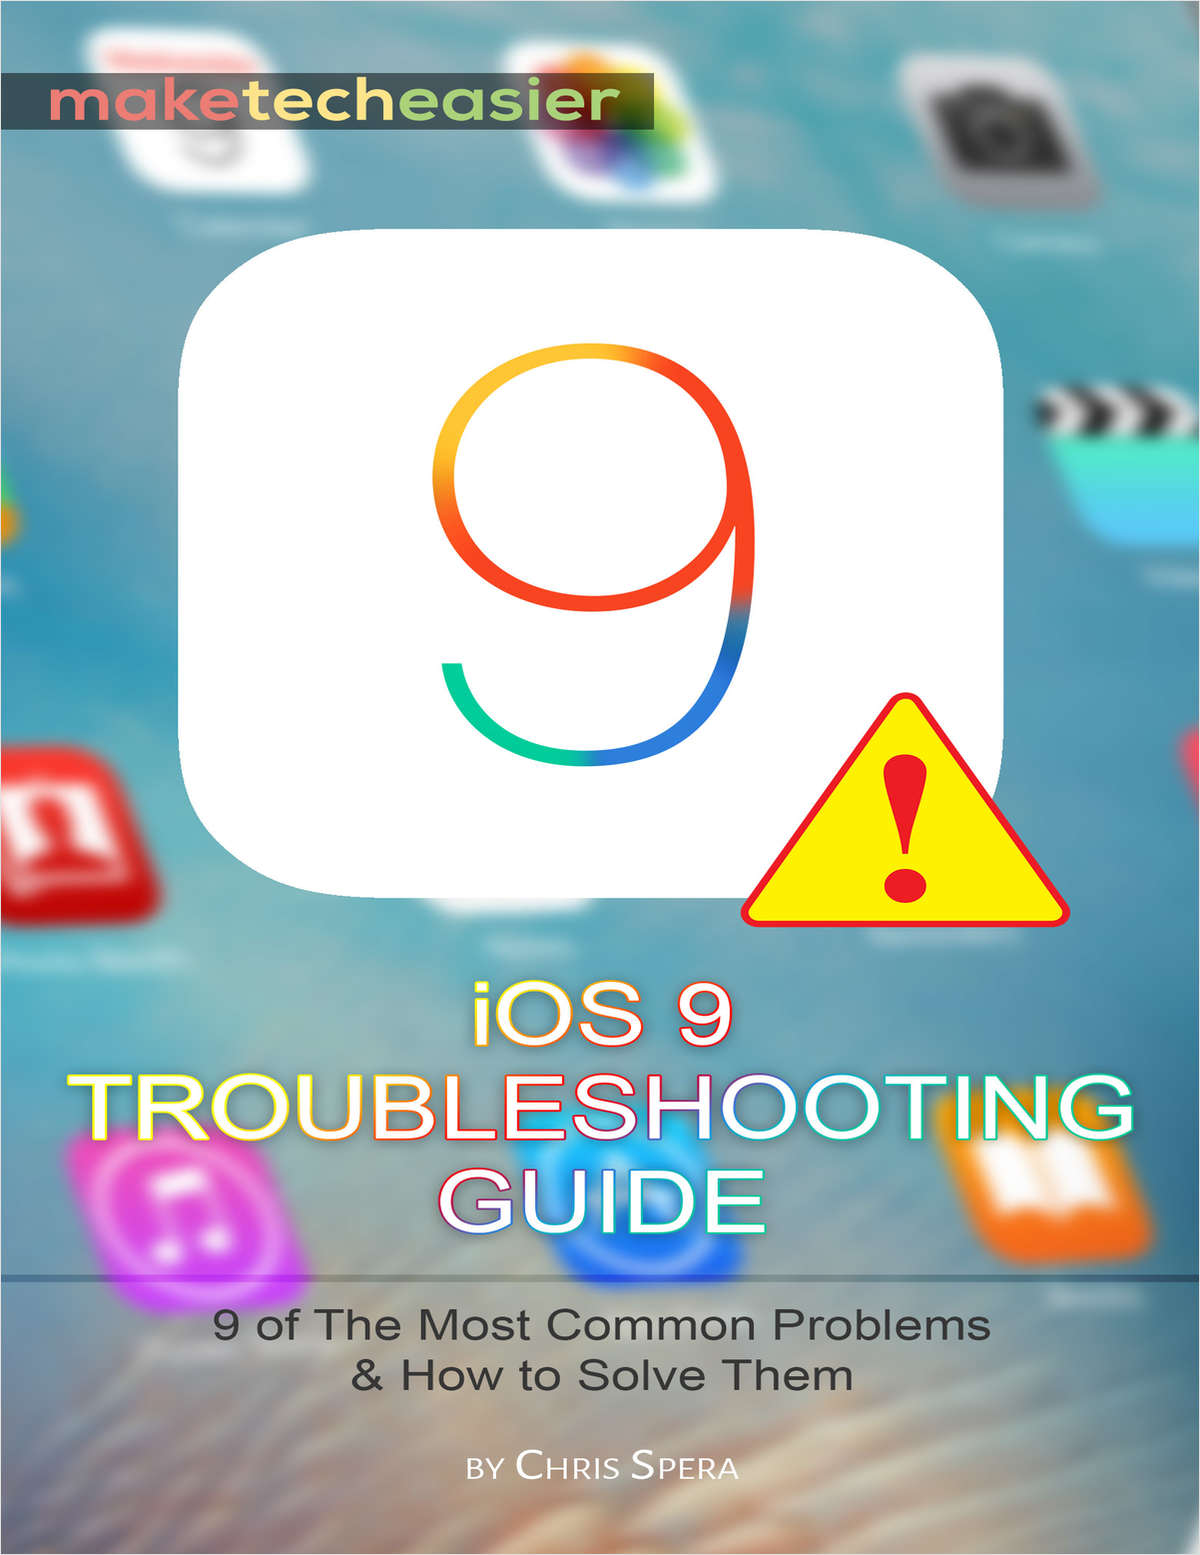 iOS 9 Troubleshooting Guide